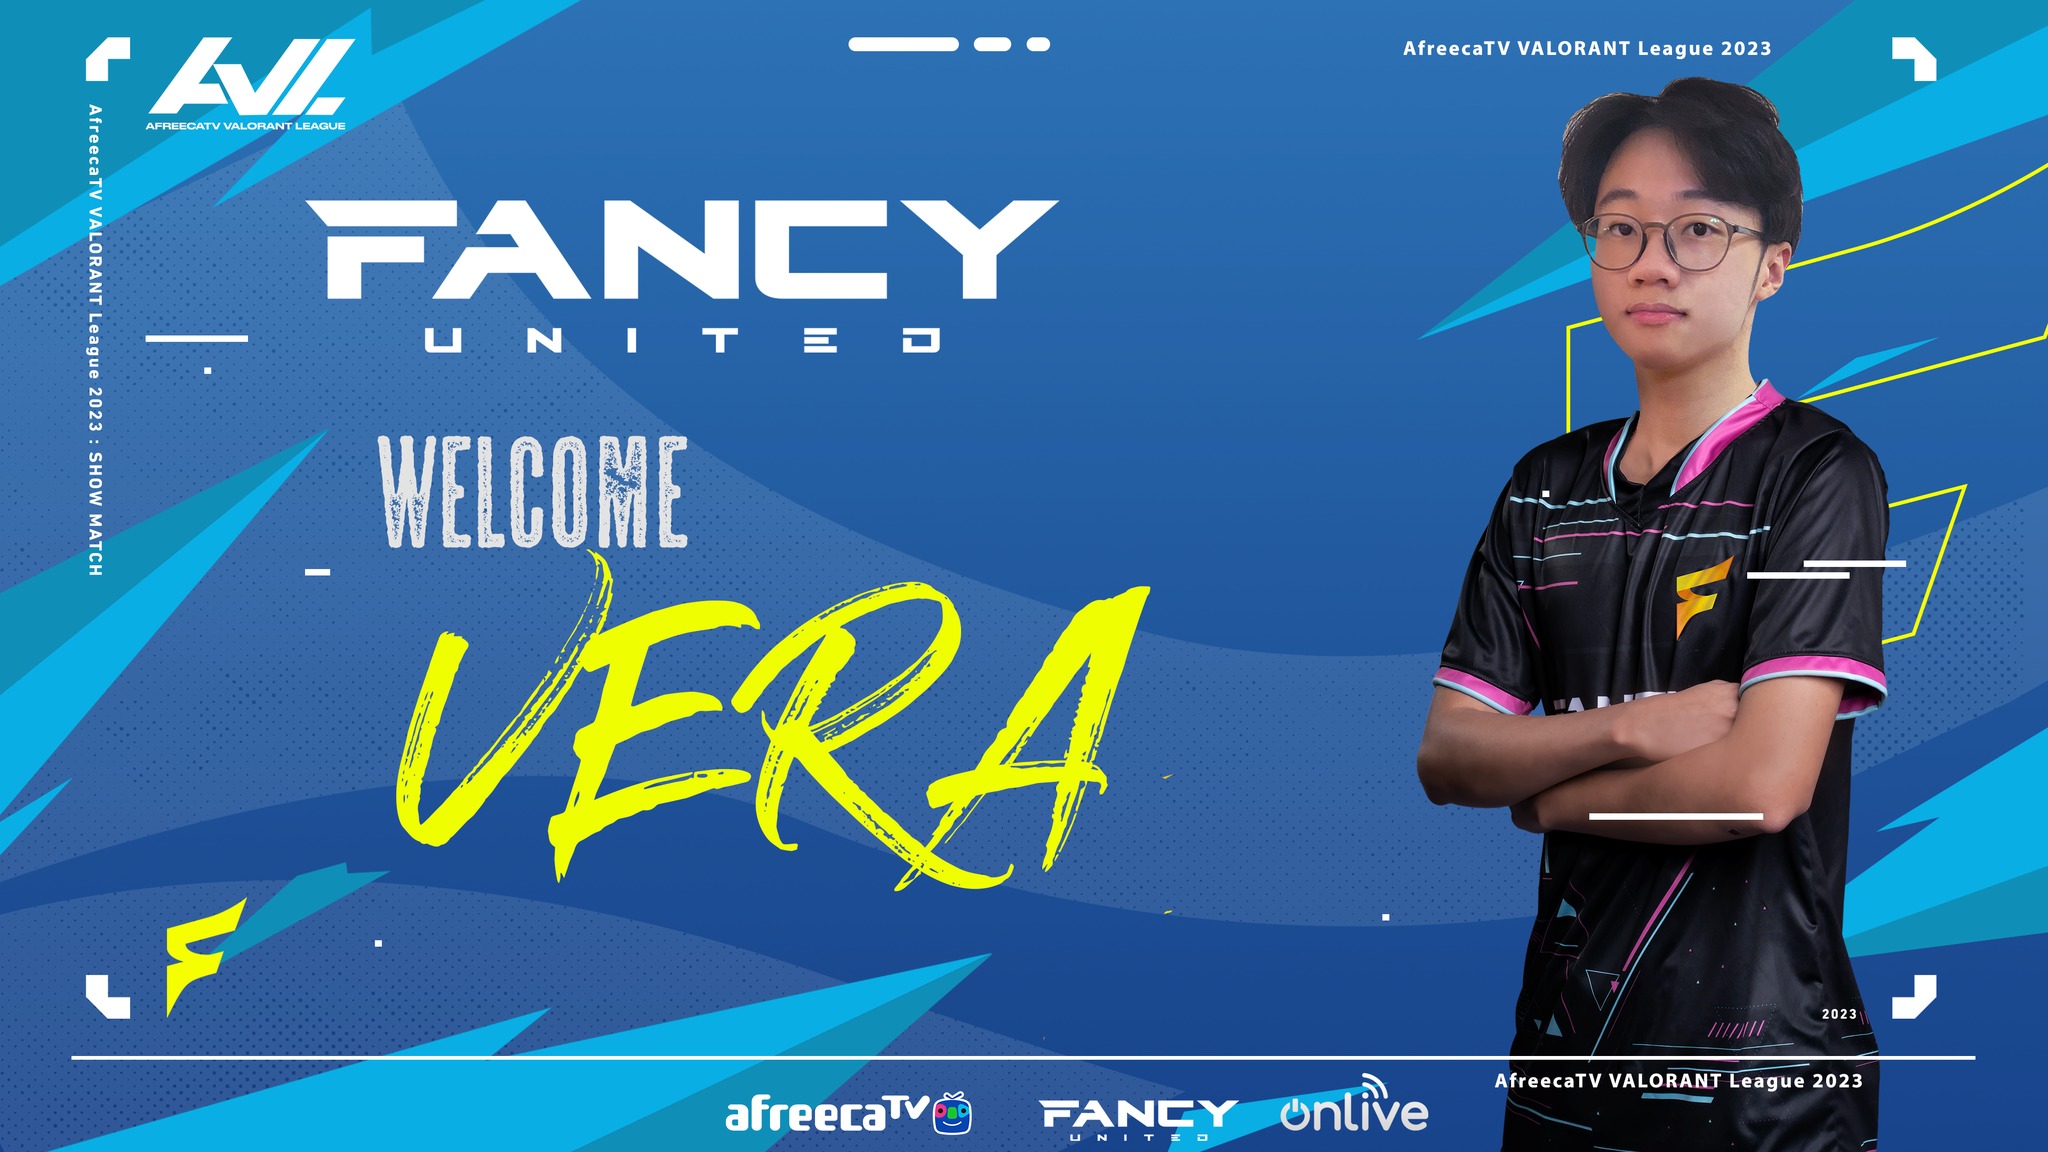 Vera to stand in for Fancy United Esports at AfreecaTV VALORANT League